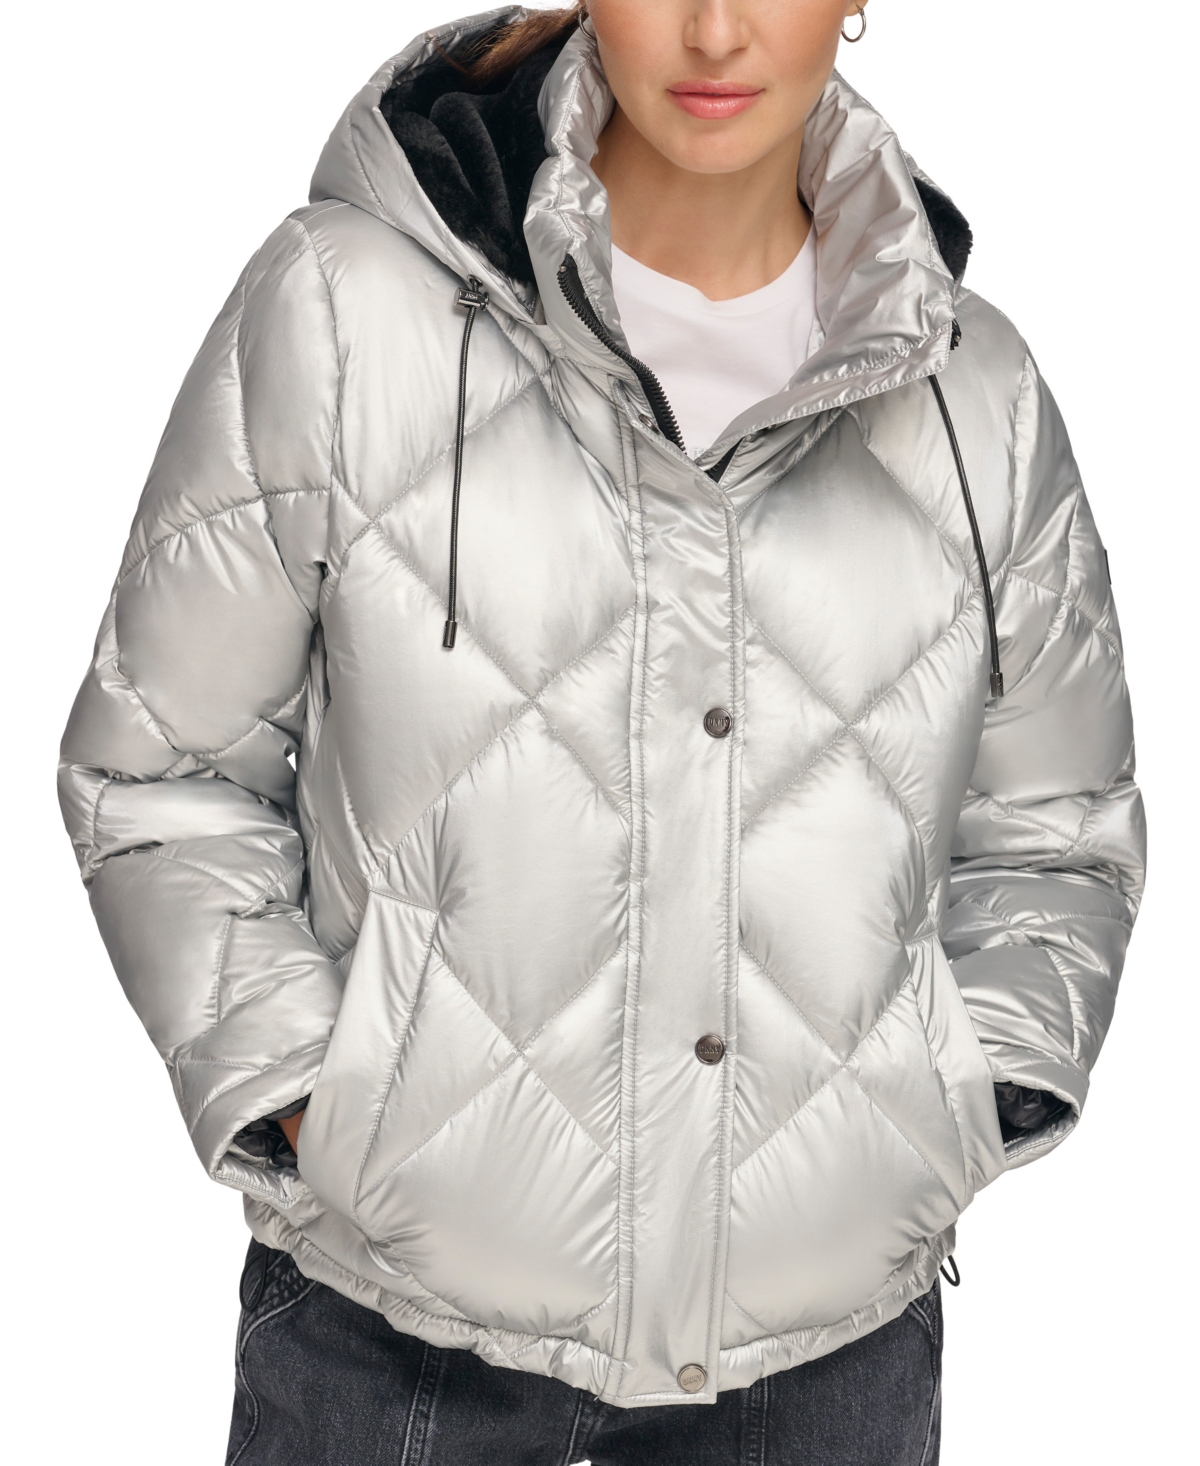 DKNY WOMEN'S DIAMOND QUILTED HOODED PUFFER COAT